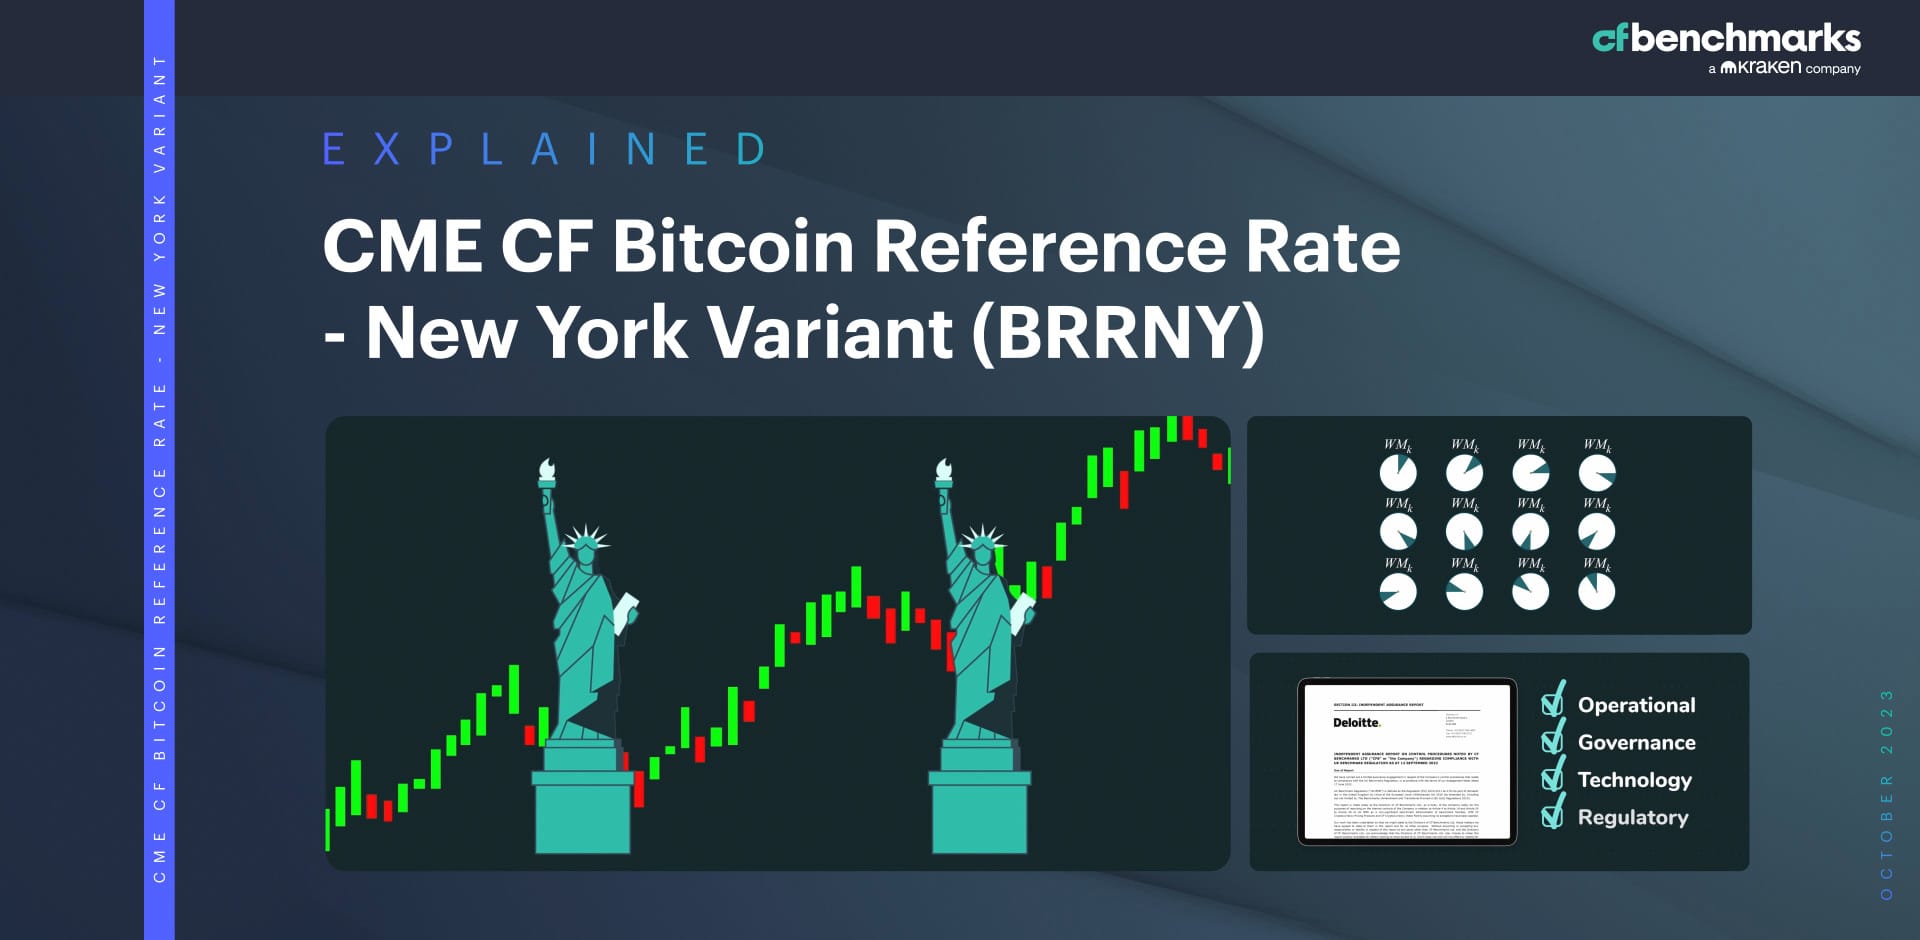 CME CF Bitcoin Reference Rate - New York Variant: Explainer Video